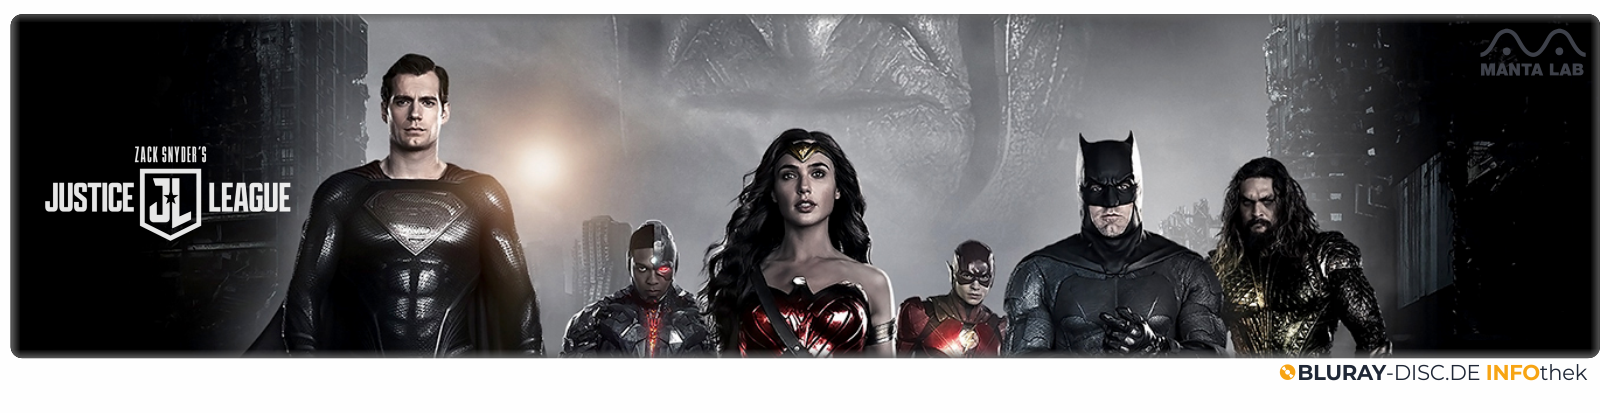 Moviebanner_Manta_Lab_Justice_League.png